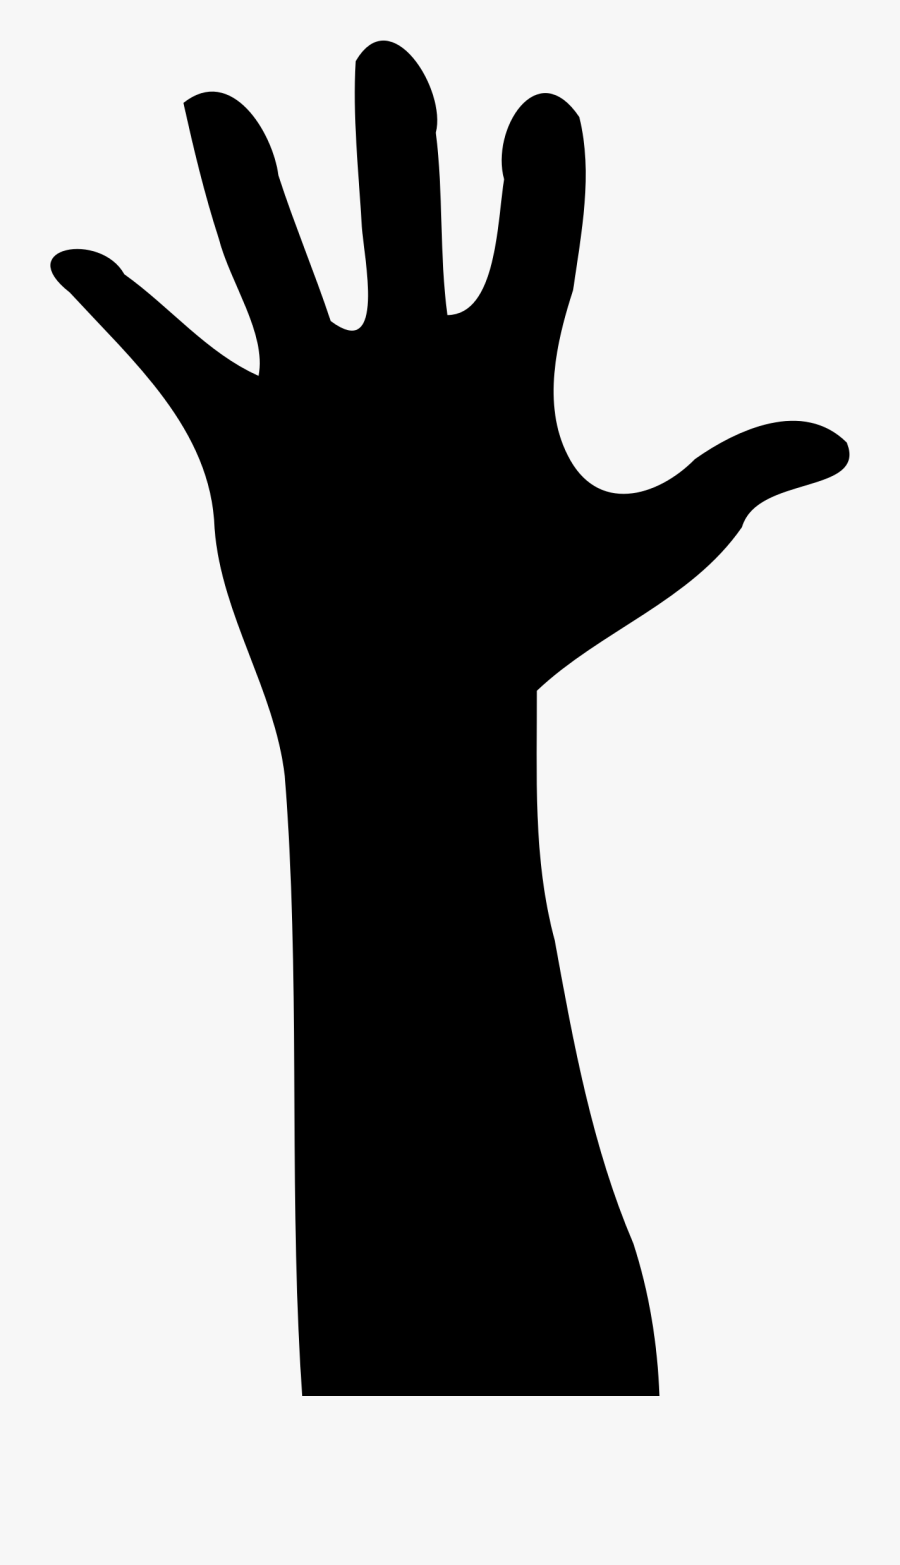 Pic Of A Raised Hand Silhouette - Raised Hand Silhouette, Transparent Clipart